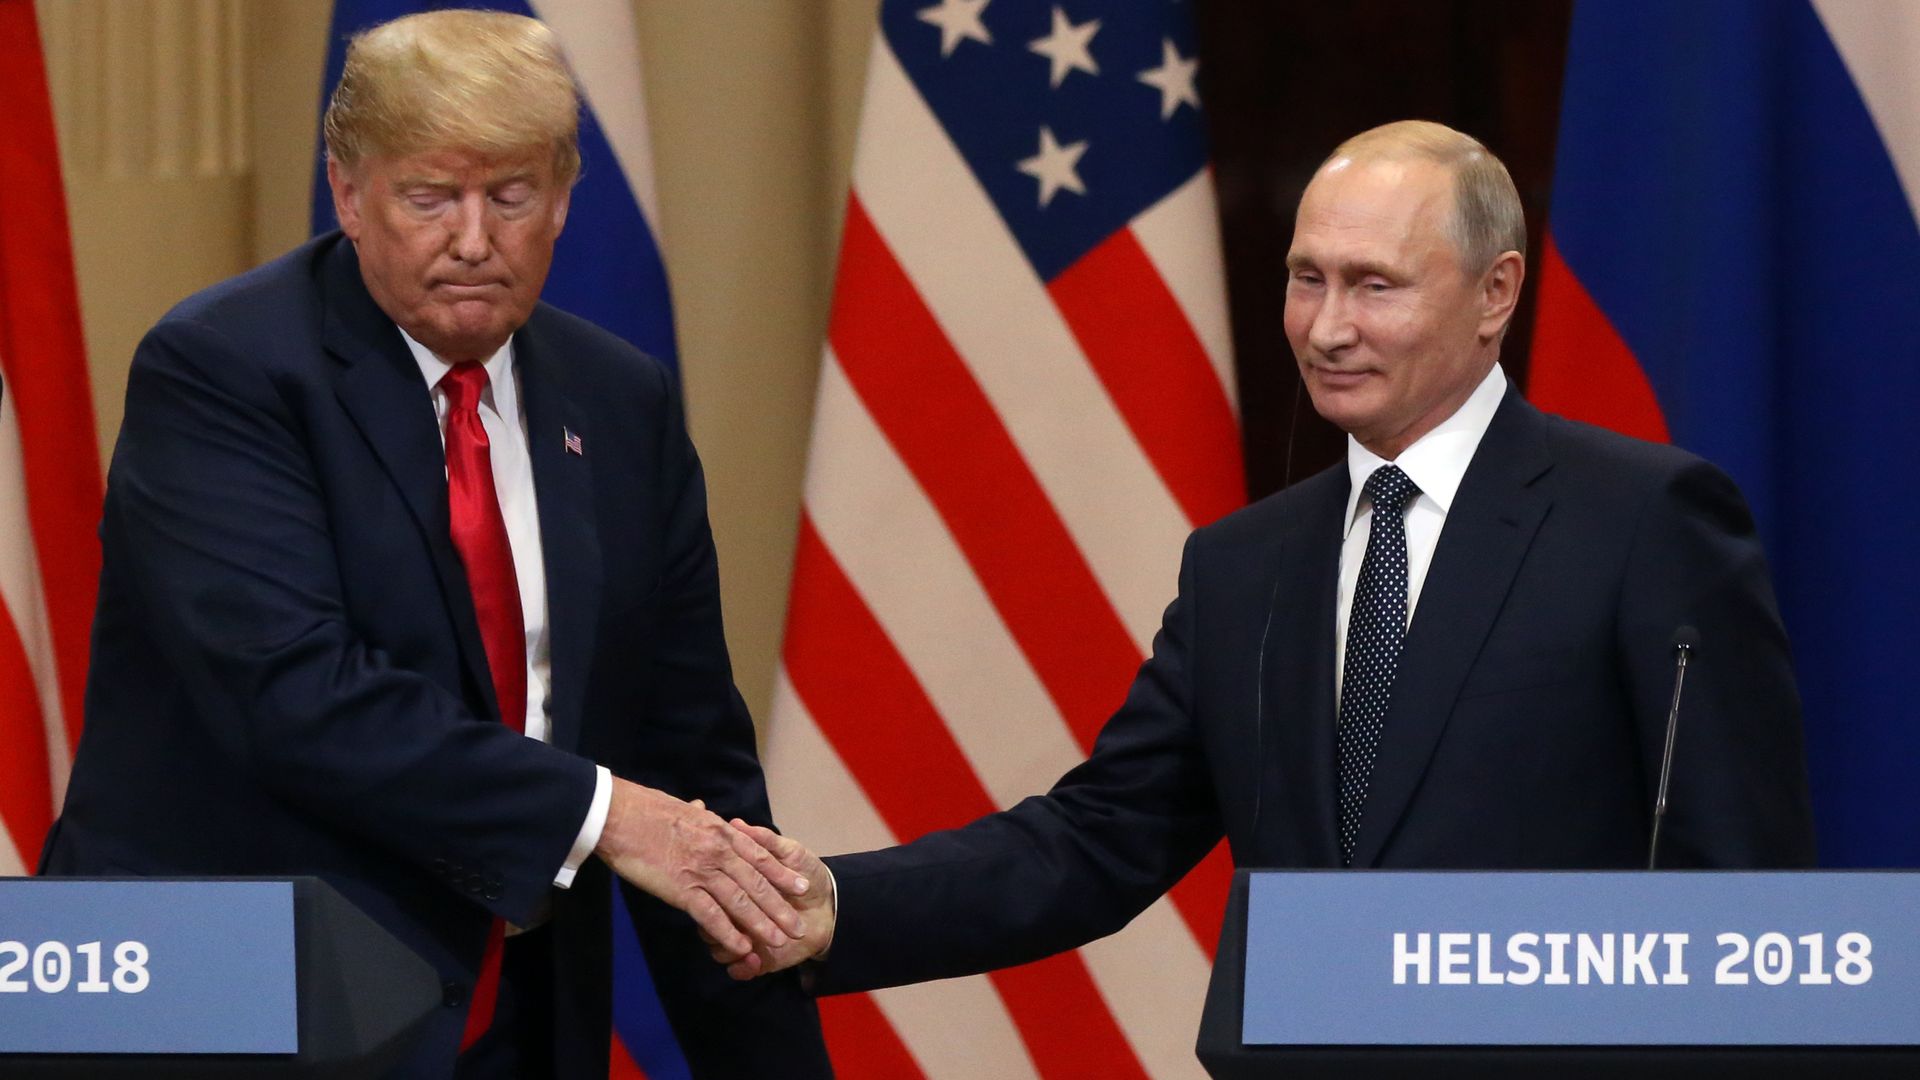 Trump and Putin shake hands while standing at podiums for press conference